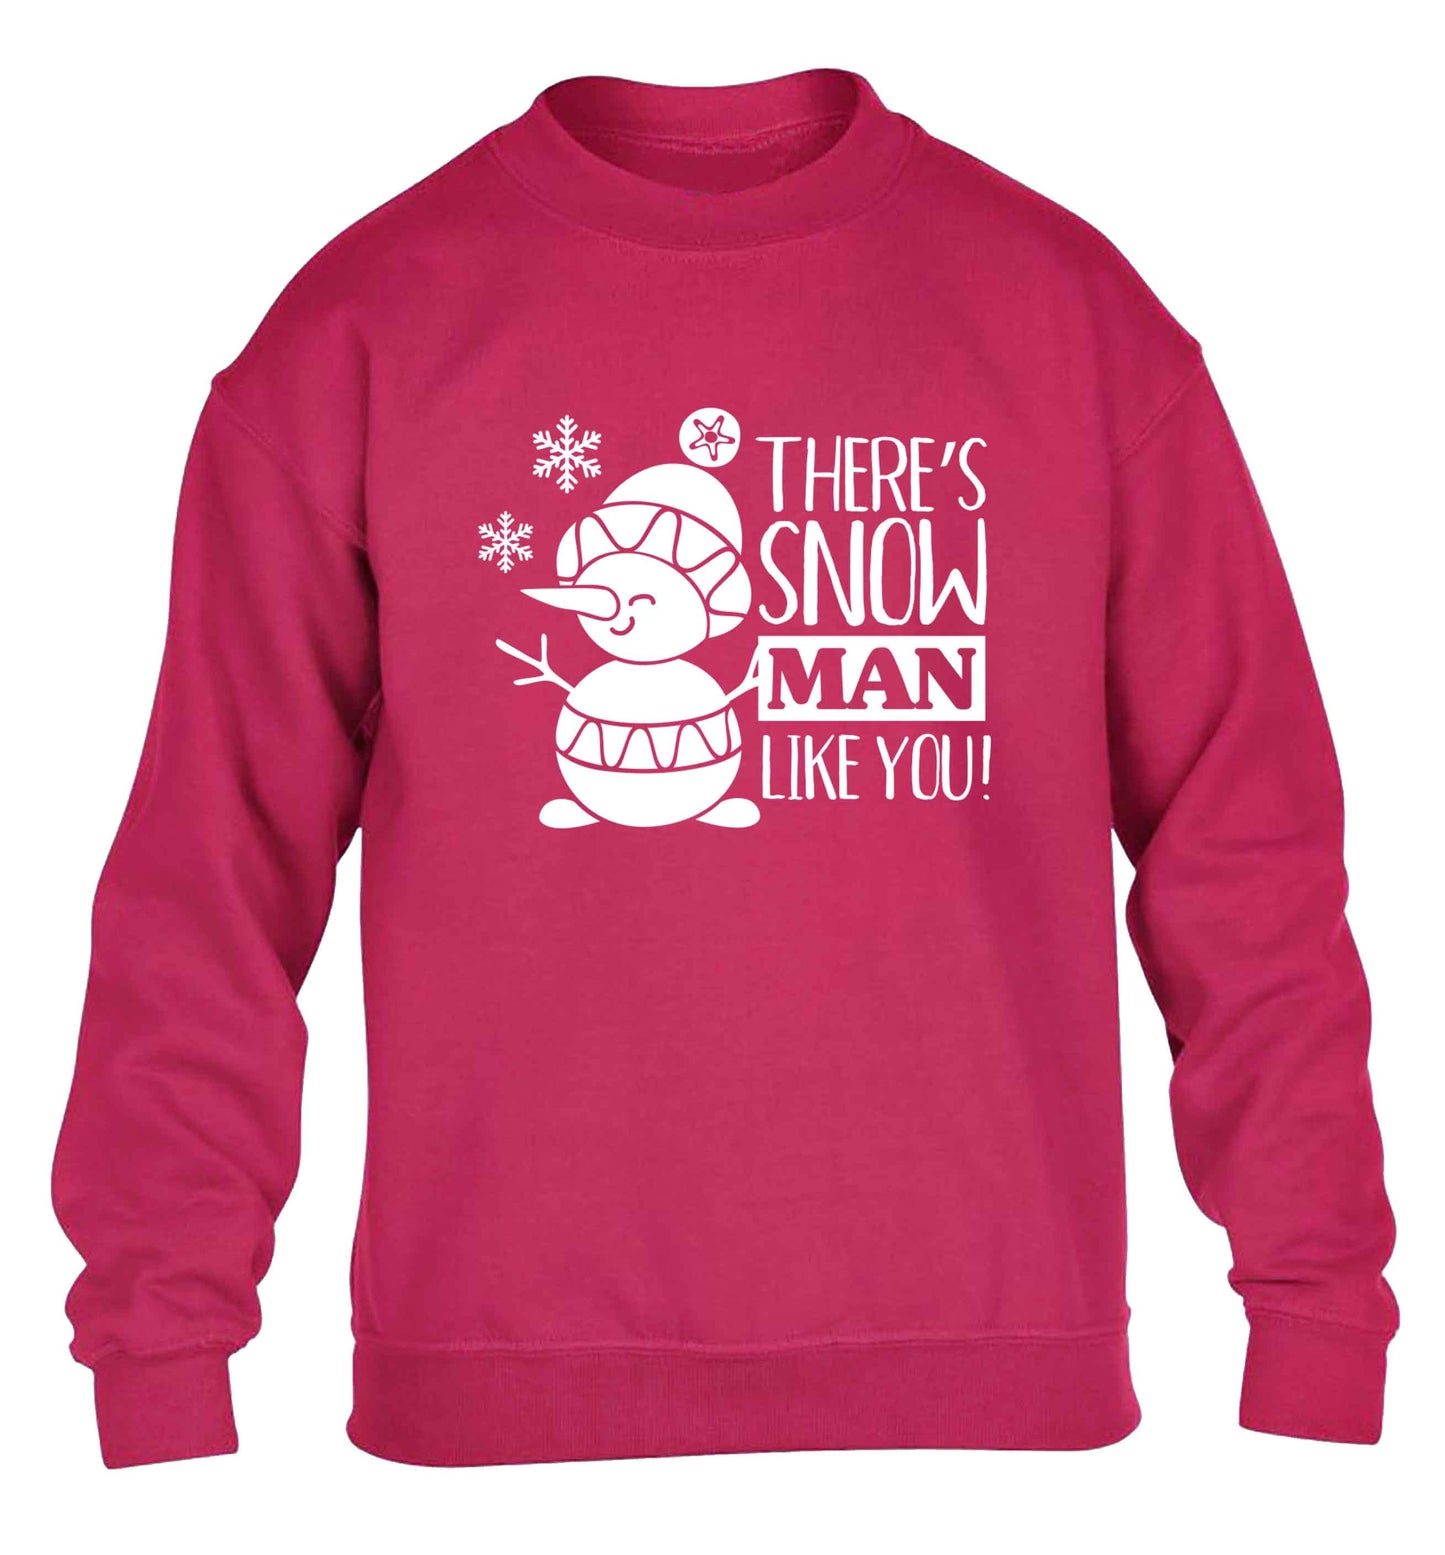 There's snow man like you children's pink sweater 12-13 Years